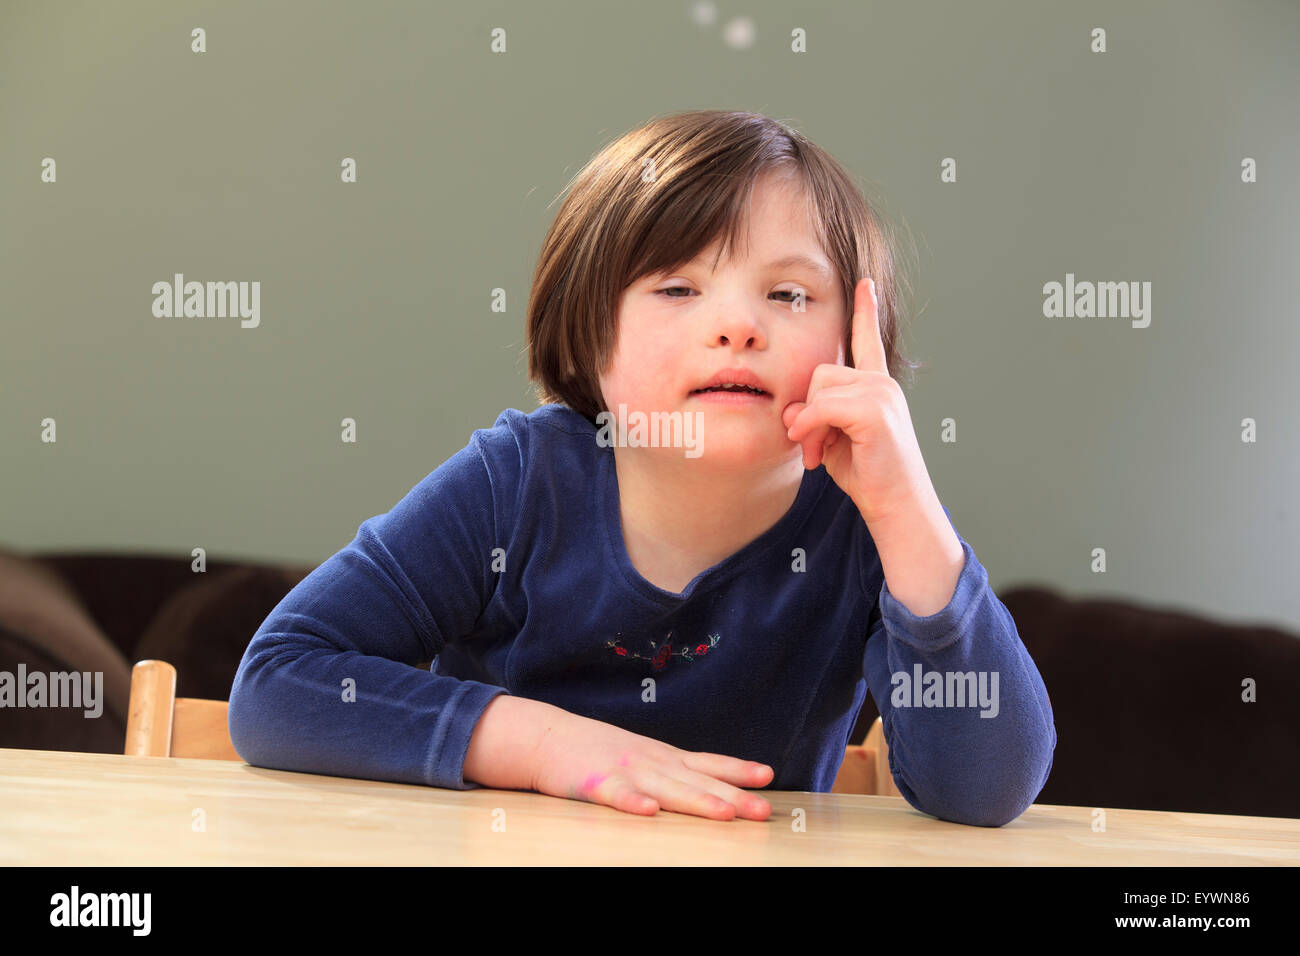 Little girl with Down Syndrome talking Stock Photo